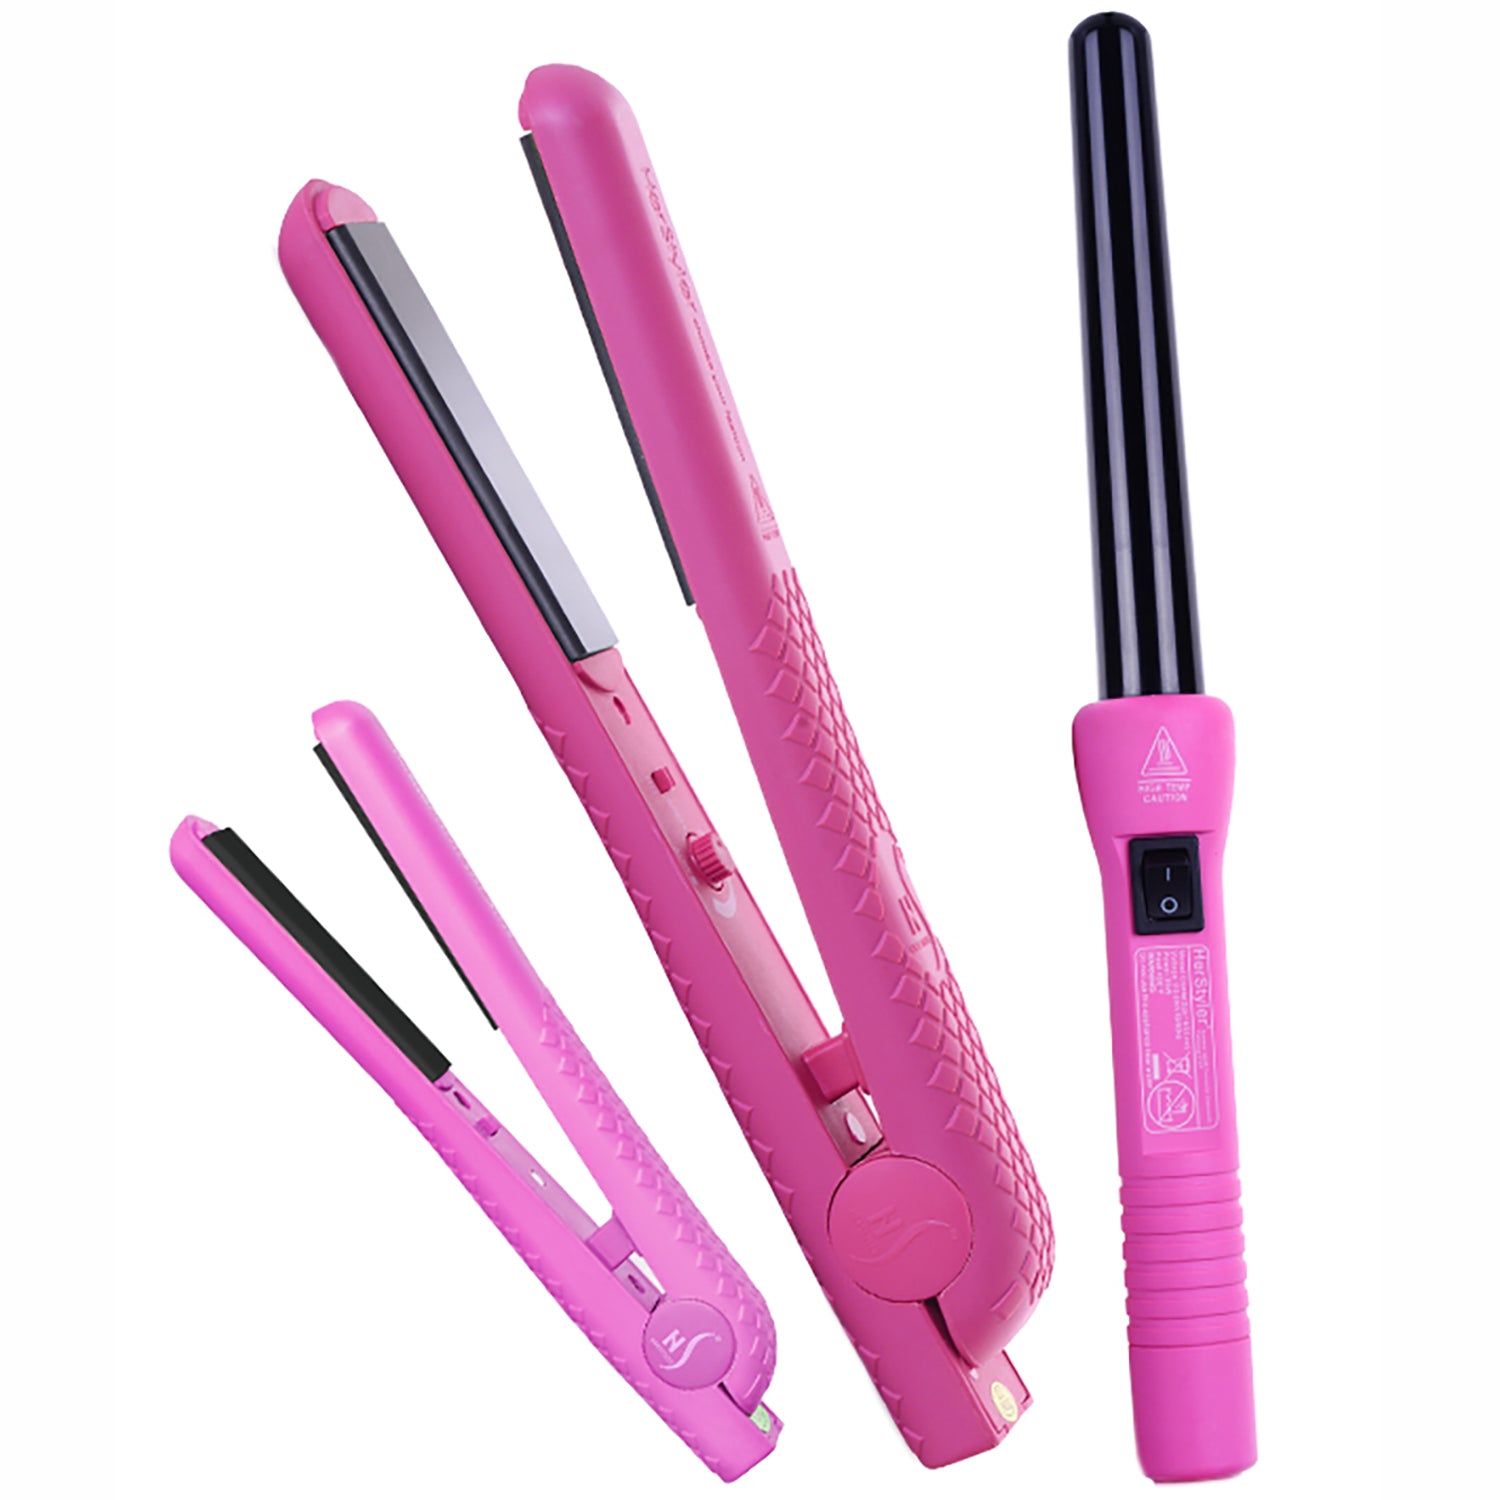 herstyler hair styling tools set pink